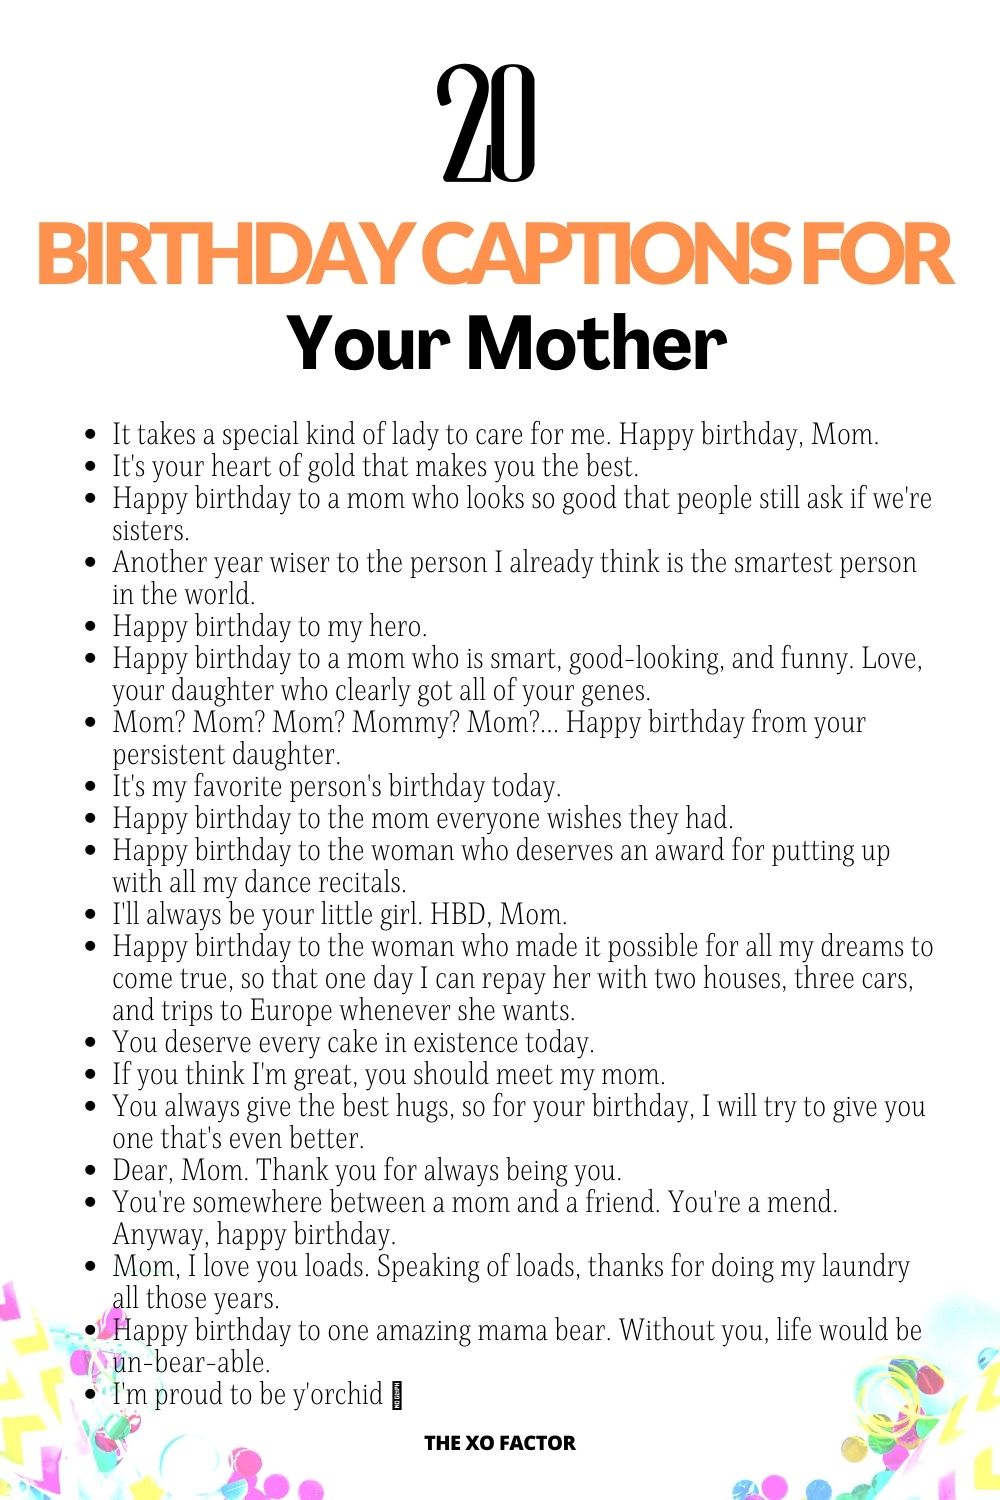 Birthday Captions For Your Mother